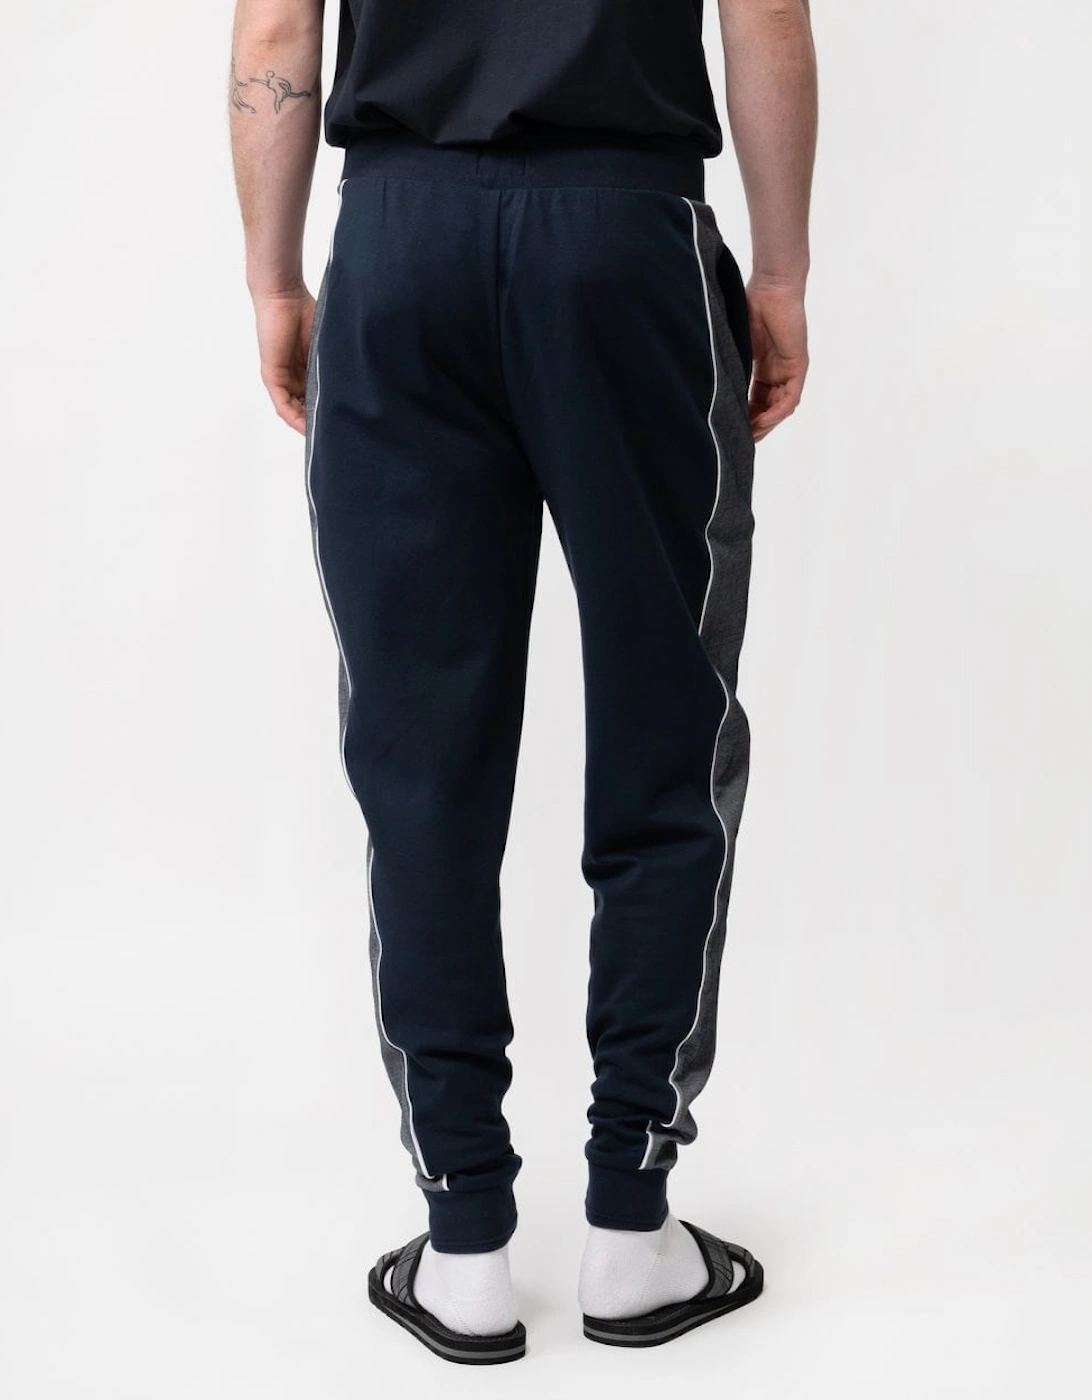 Orange Mens Loungewear Tracksuit Bottoms with Embroidered Logo